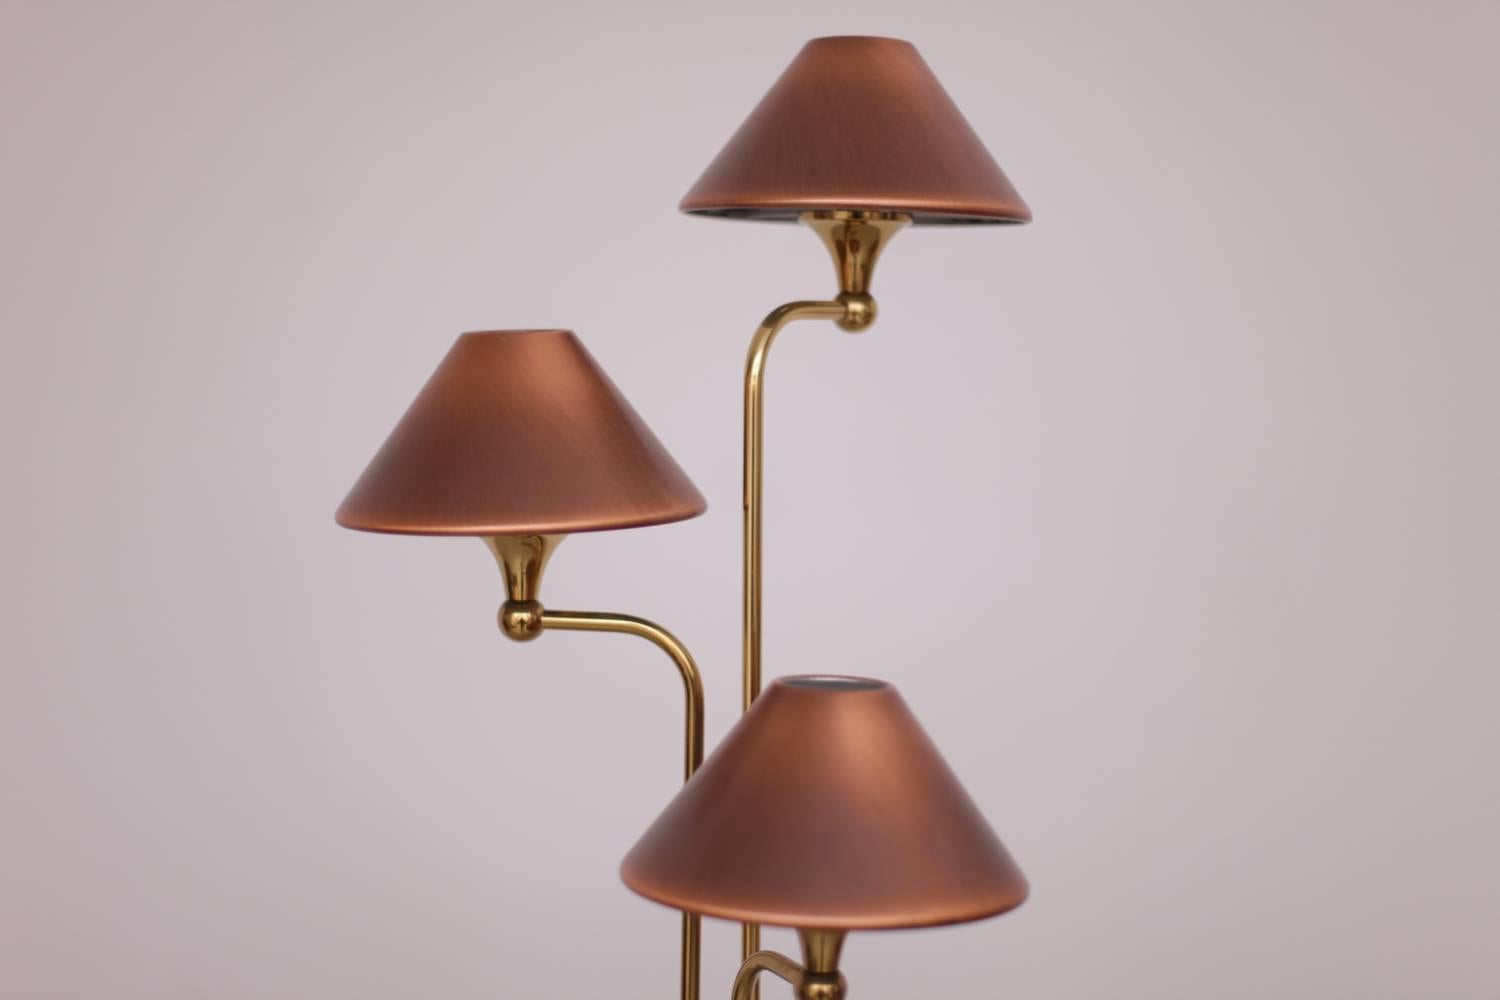 Very cute copper shades on this 1970s floor lamp. This Lamp is well made and manufactured in Germany.
To be on the the safe side, the lamp should be checked locally by a specialist concerning local requirements.

